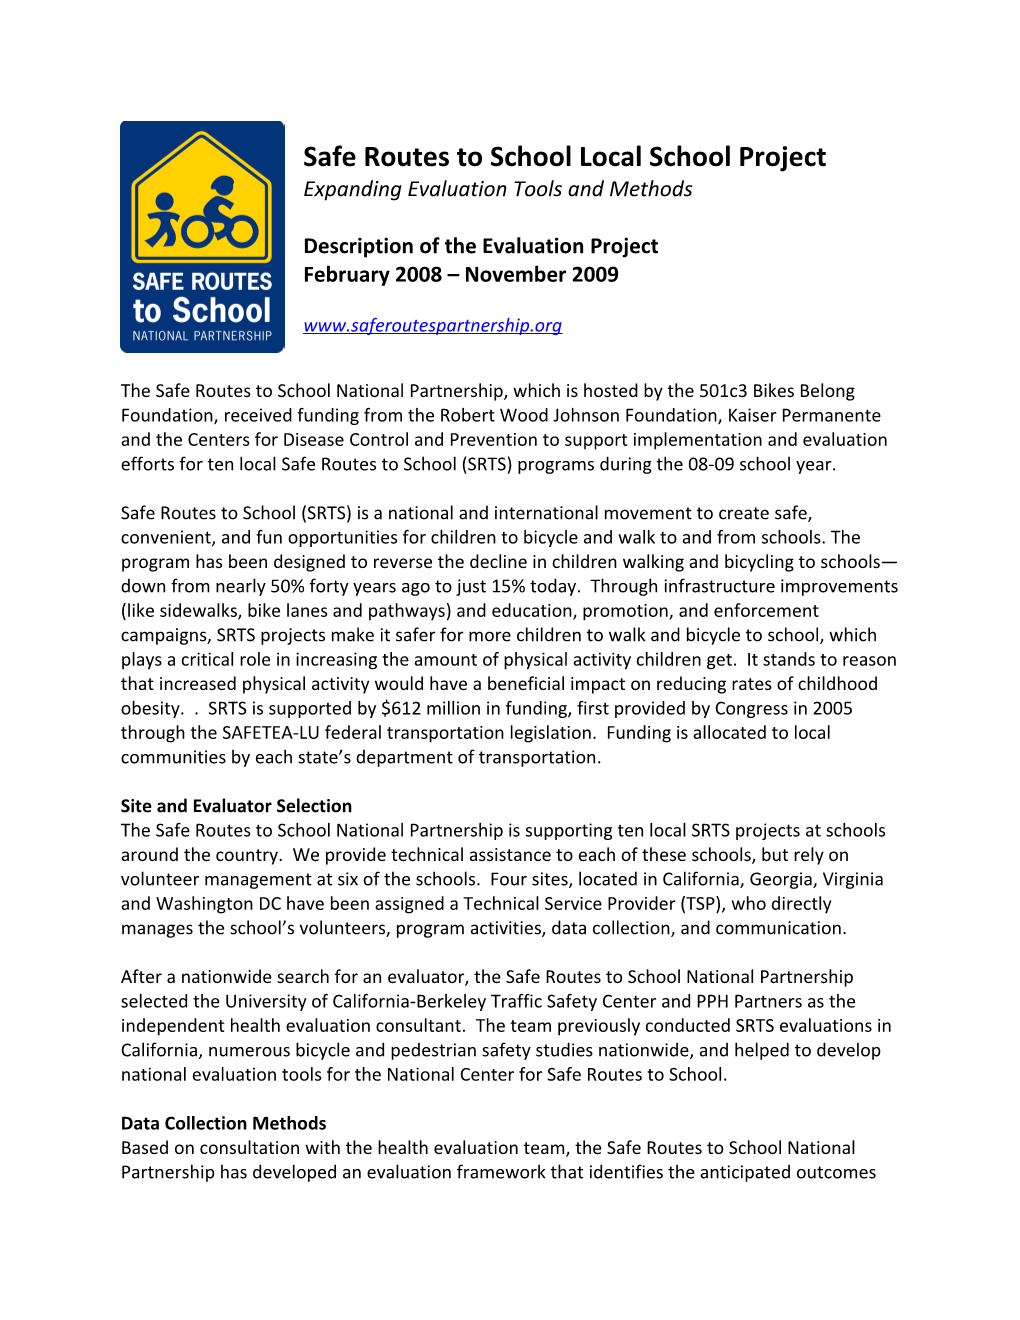 Description of the Local School Evaluation Project (For the CDC)